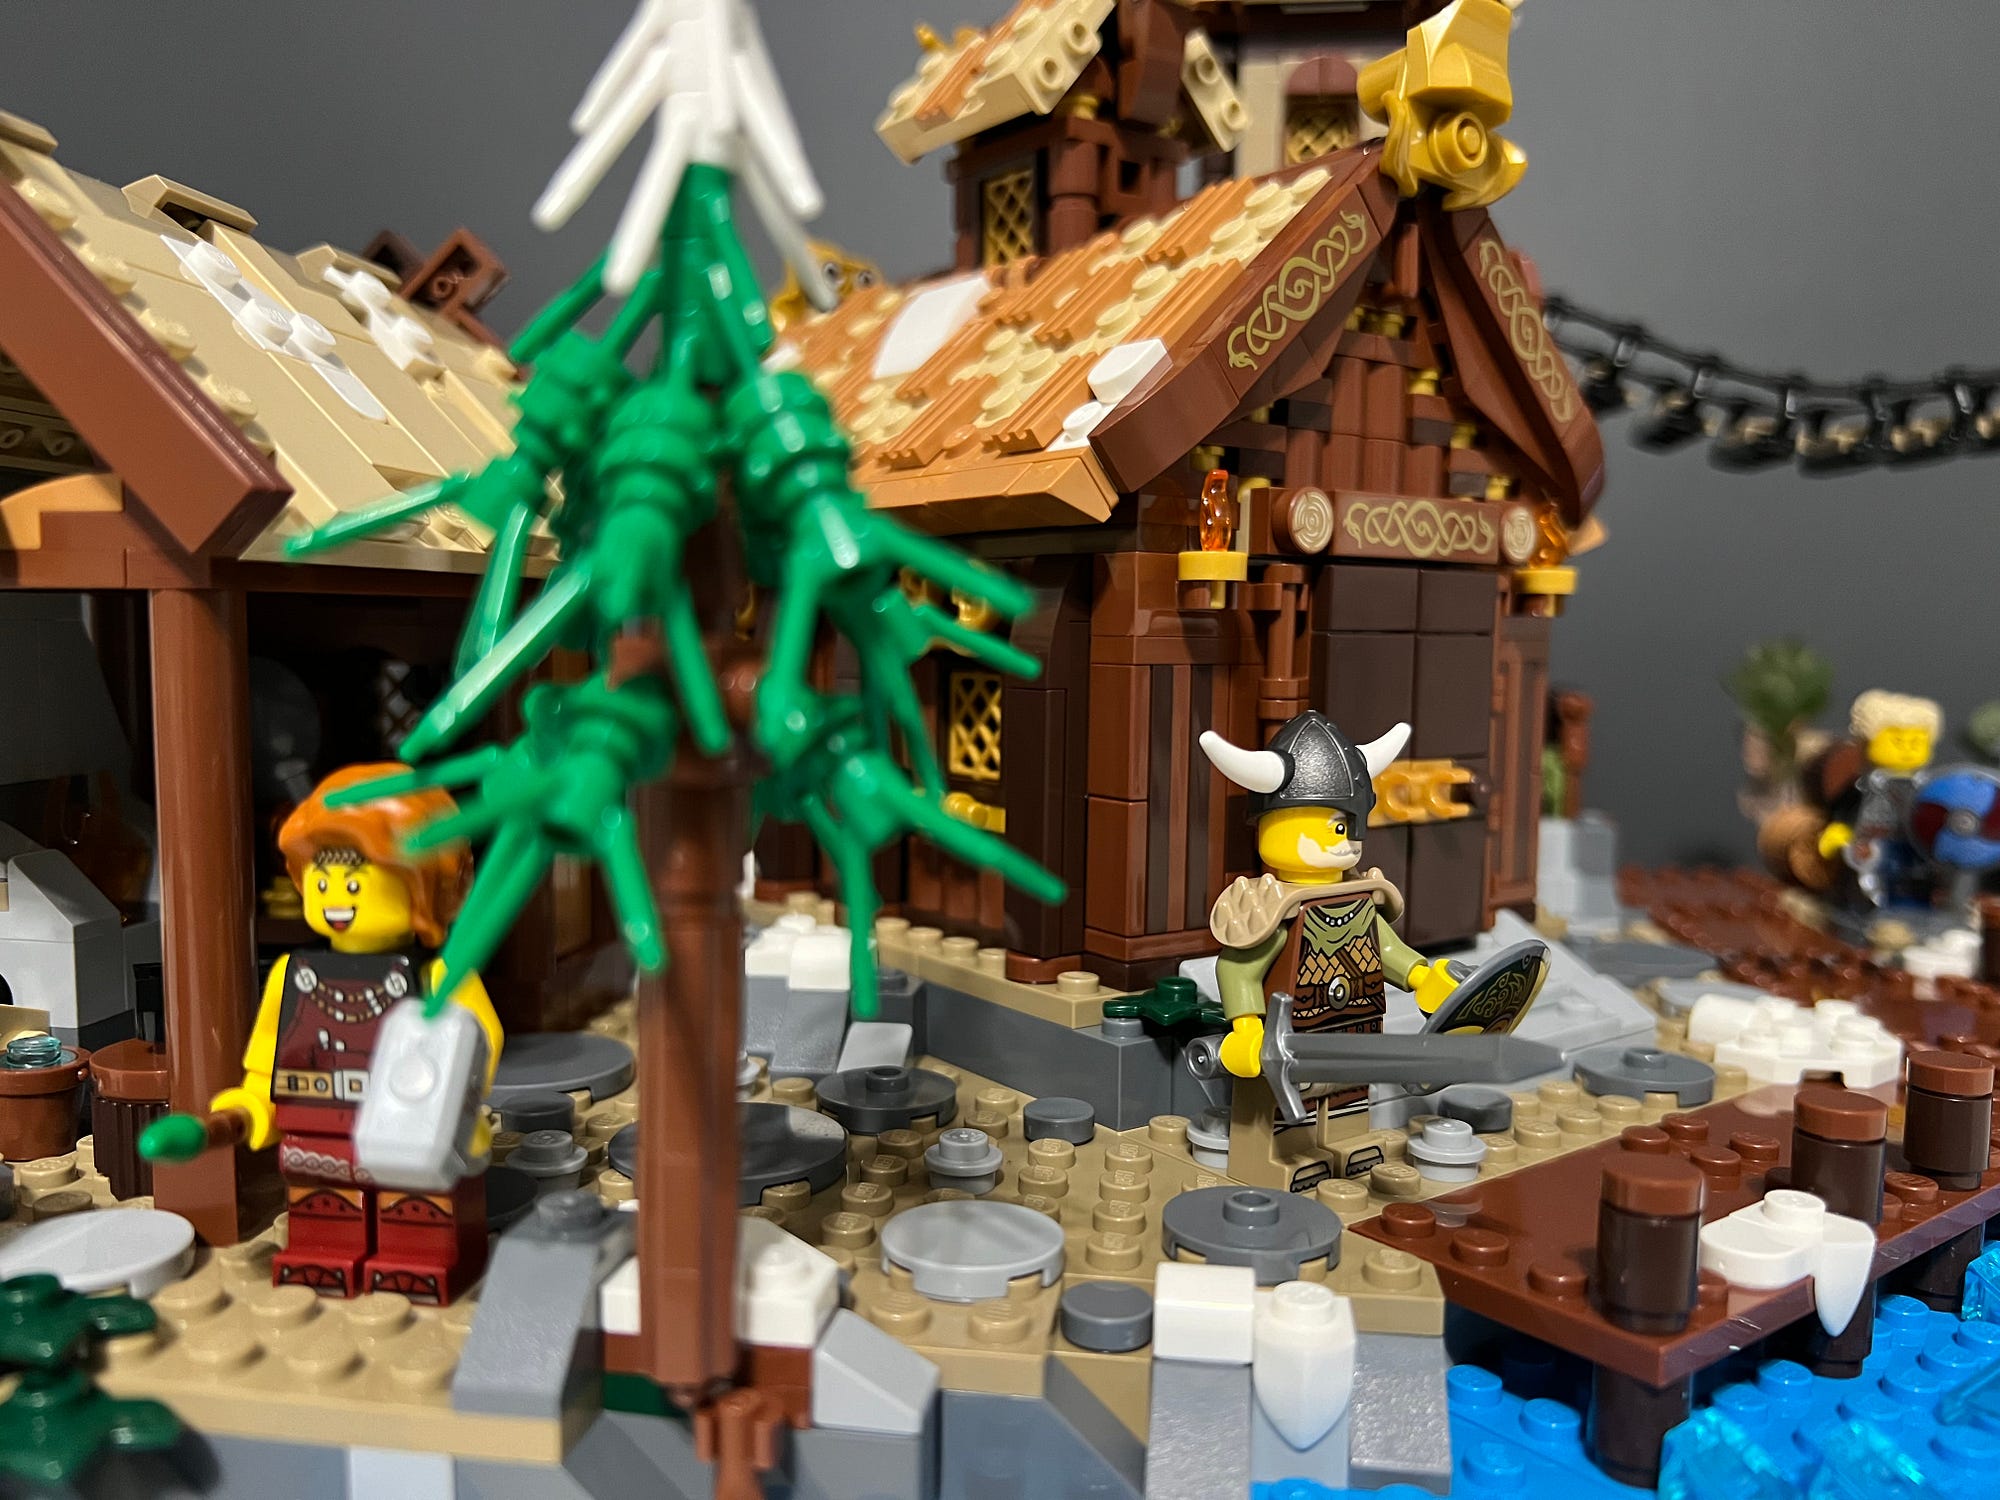 LEGO Gets Viking History Wrong, But Who Cares At This Price?